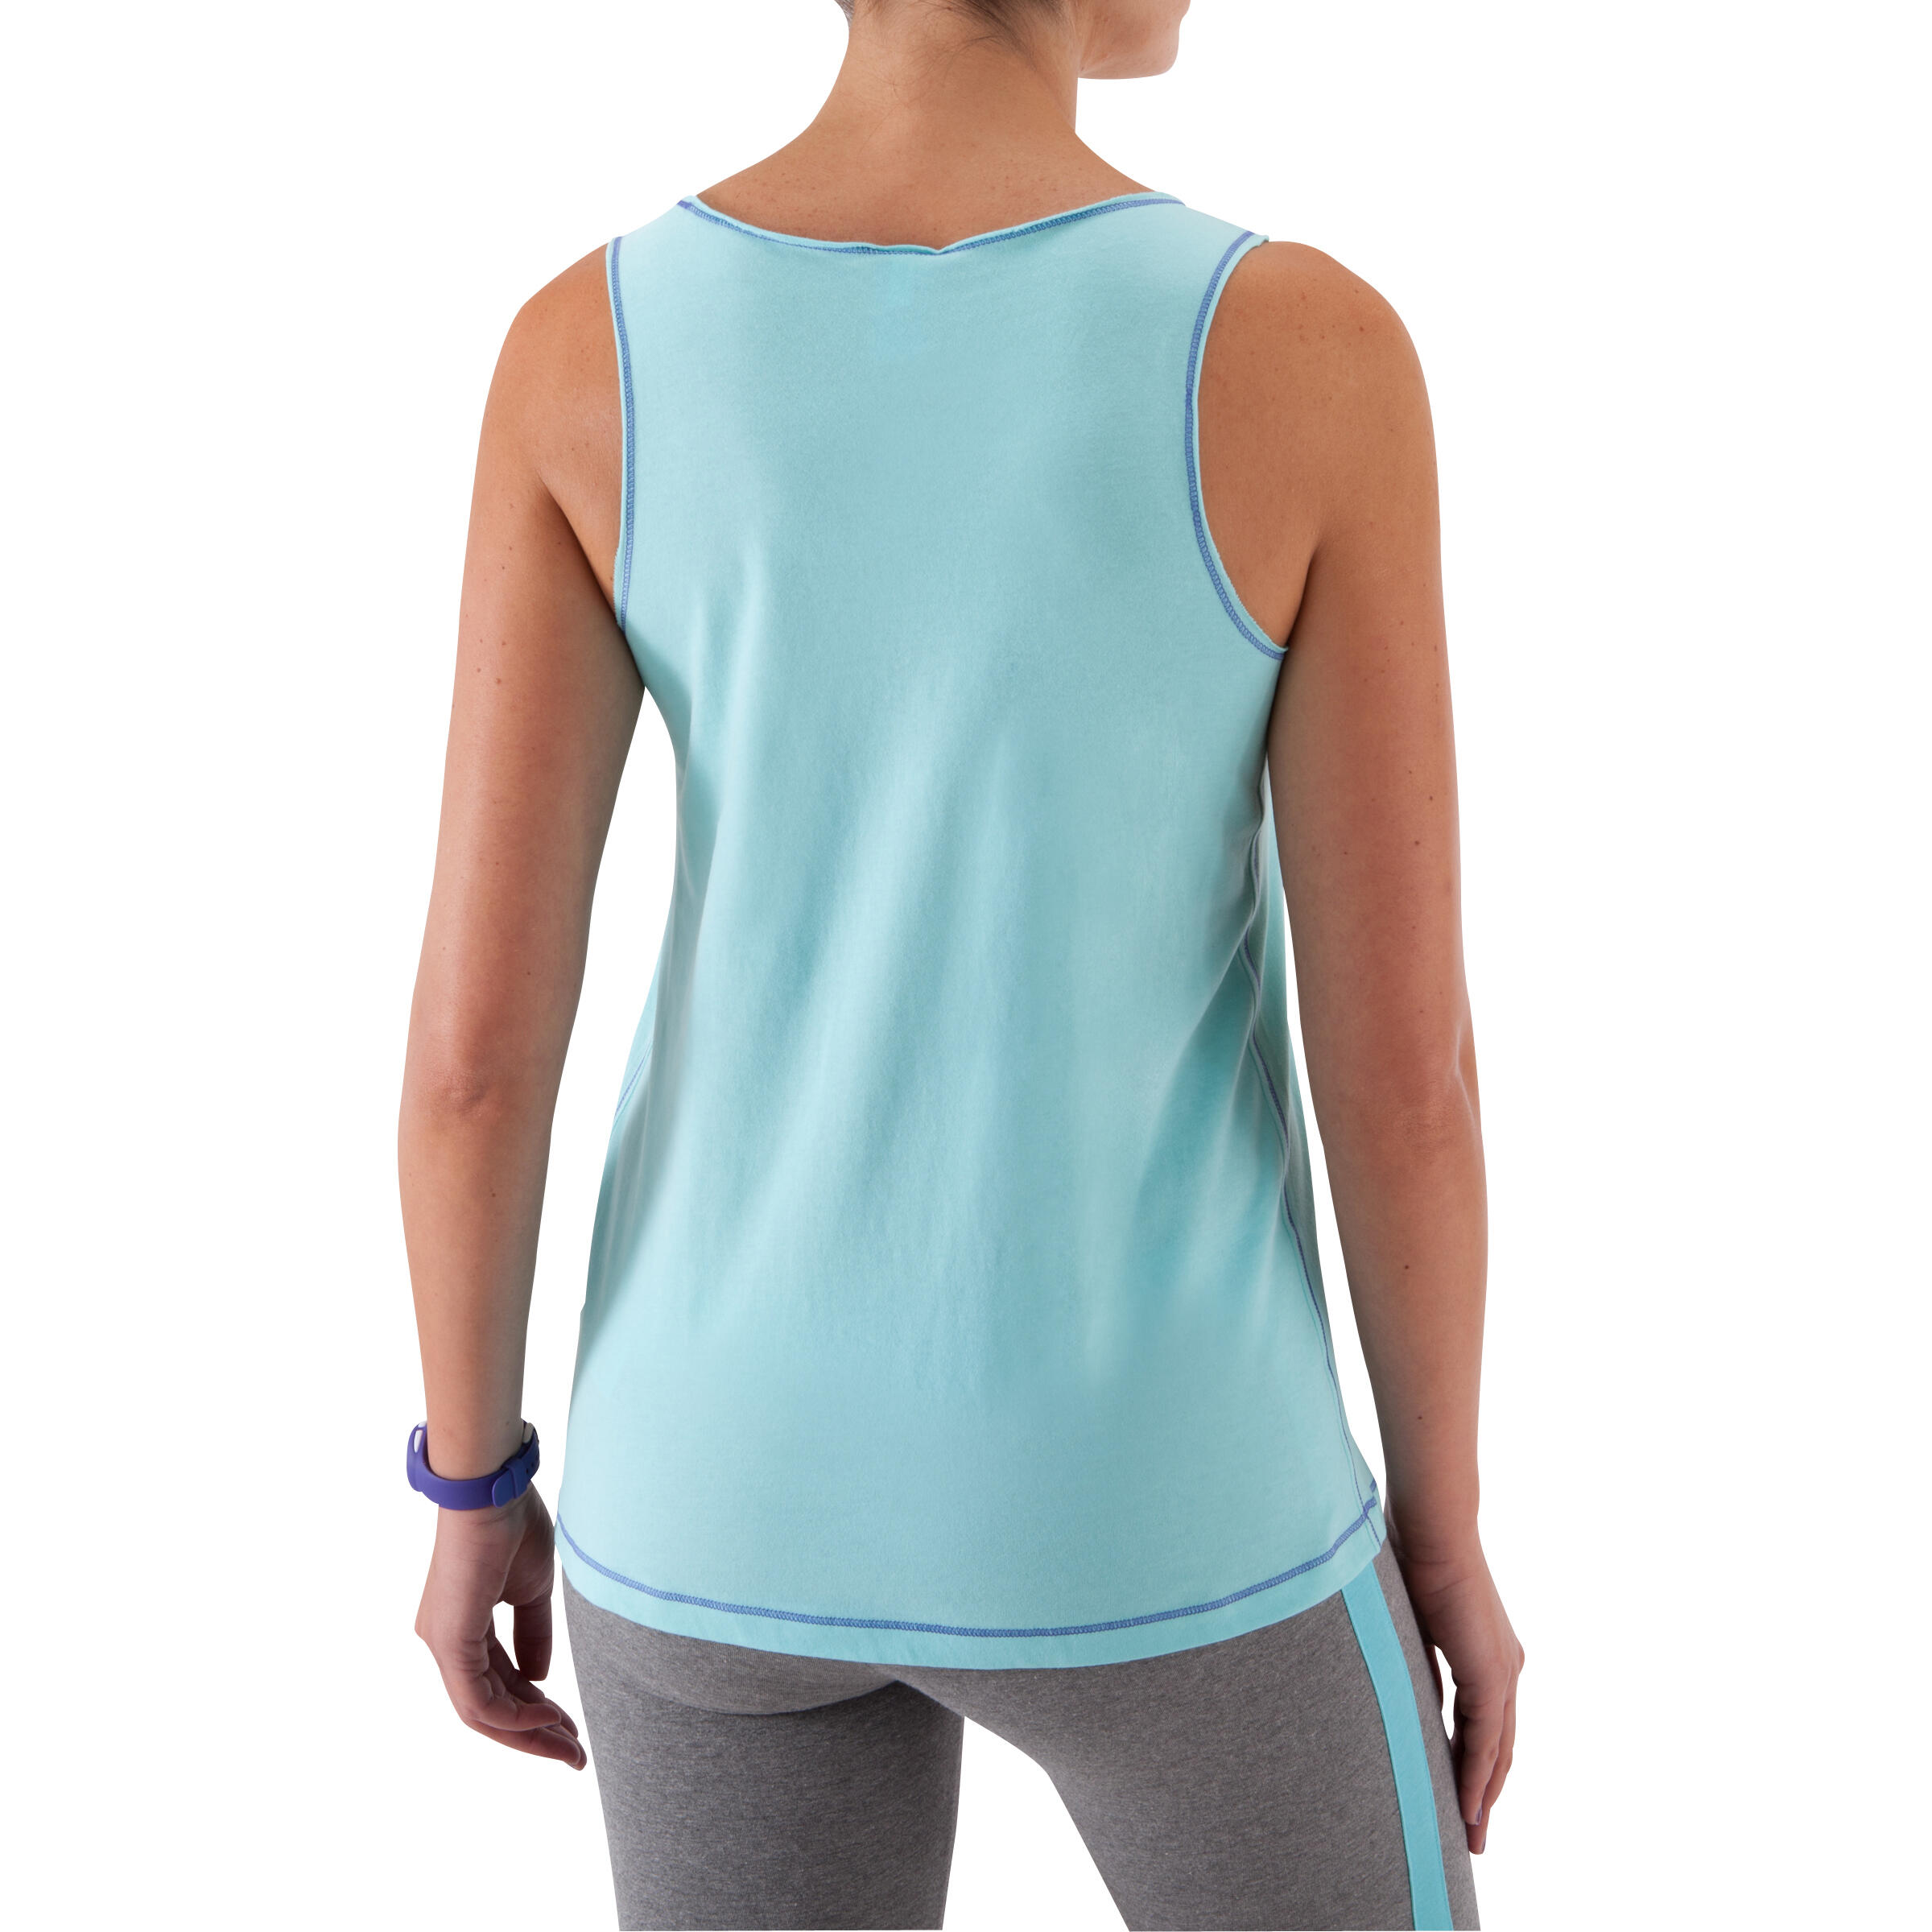 Women's Fitness Tank Top - Turquoise 6/12